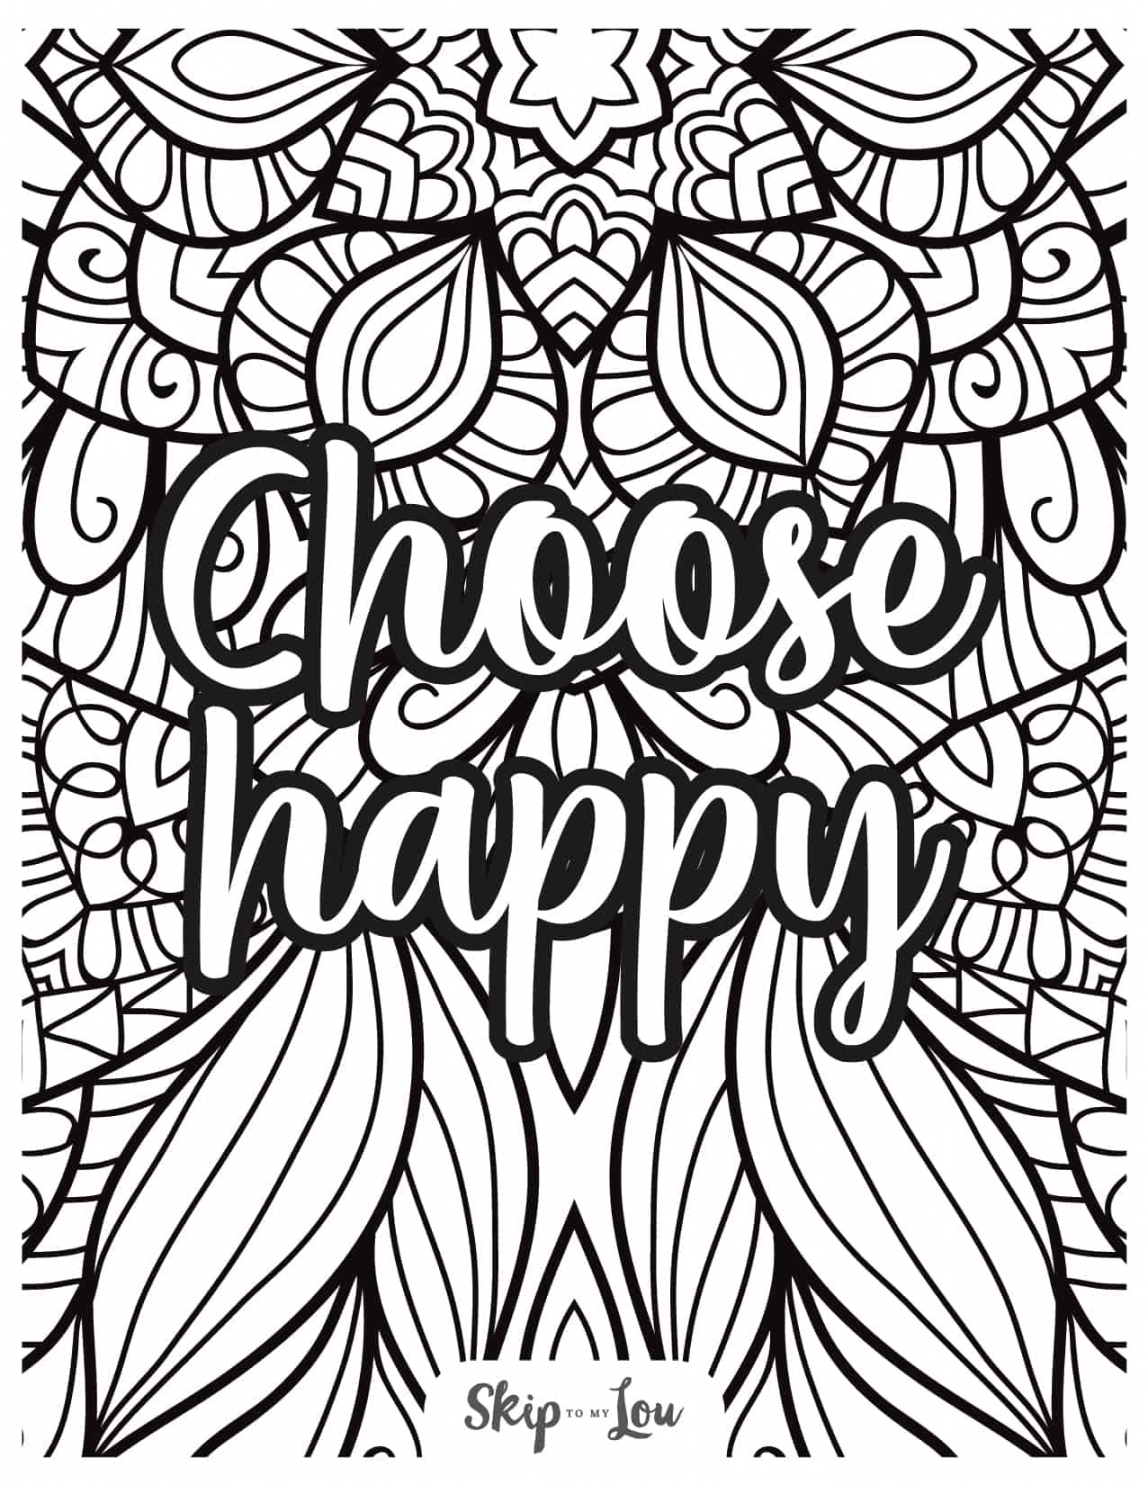 Printable Free Coloring Pages - Printable - Free Coloring Pages For Adults  Skip To My Lou